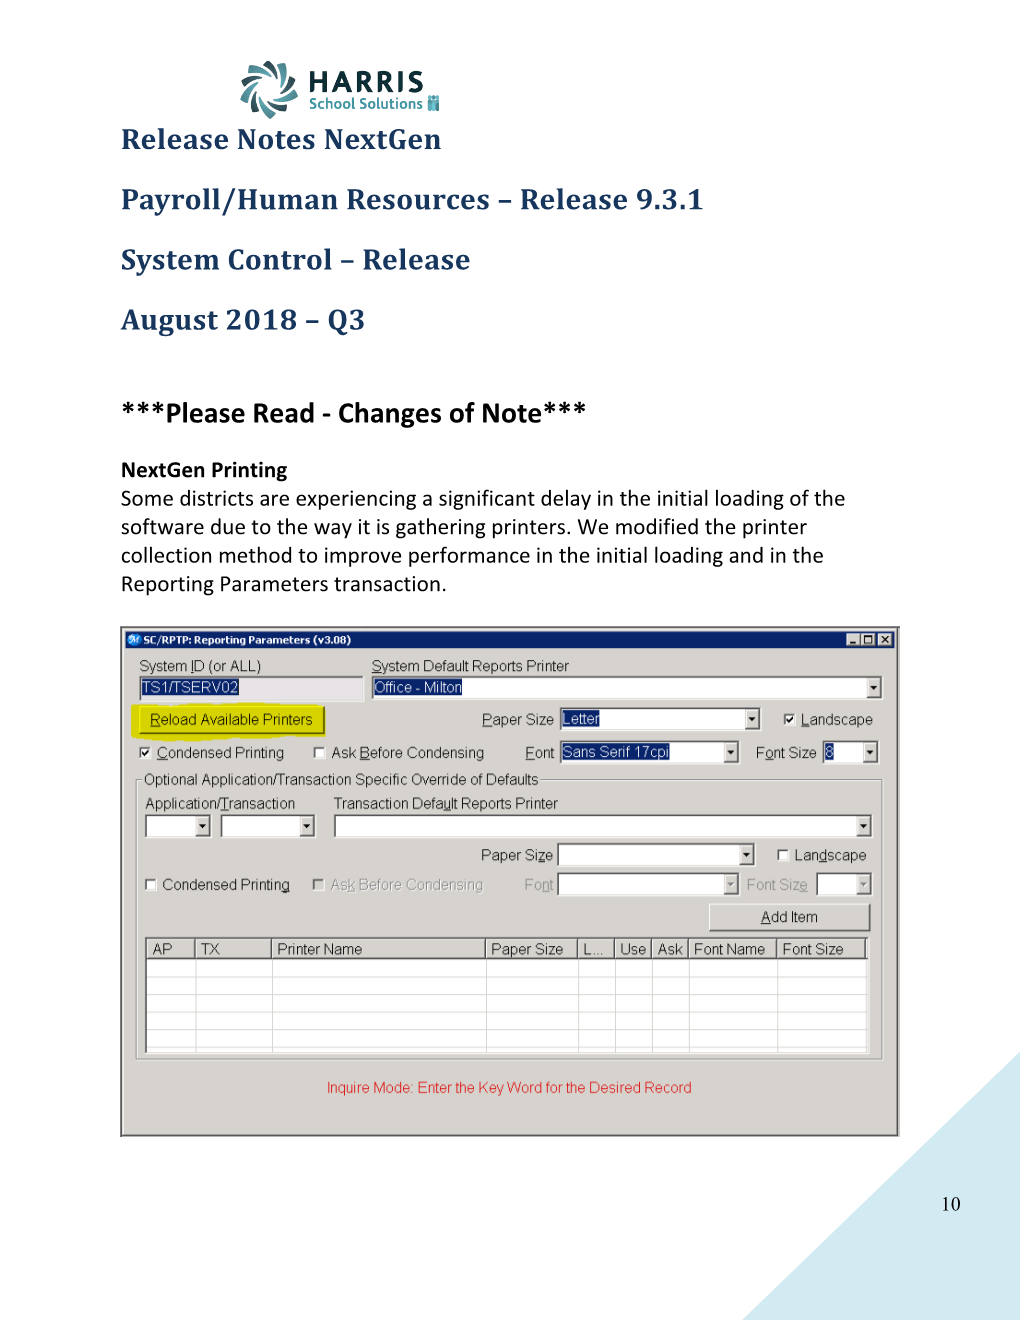 Payroll/Human Resources Release 9.3.1